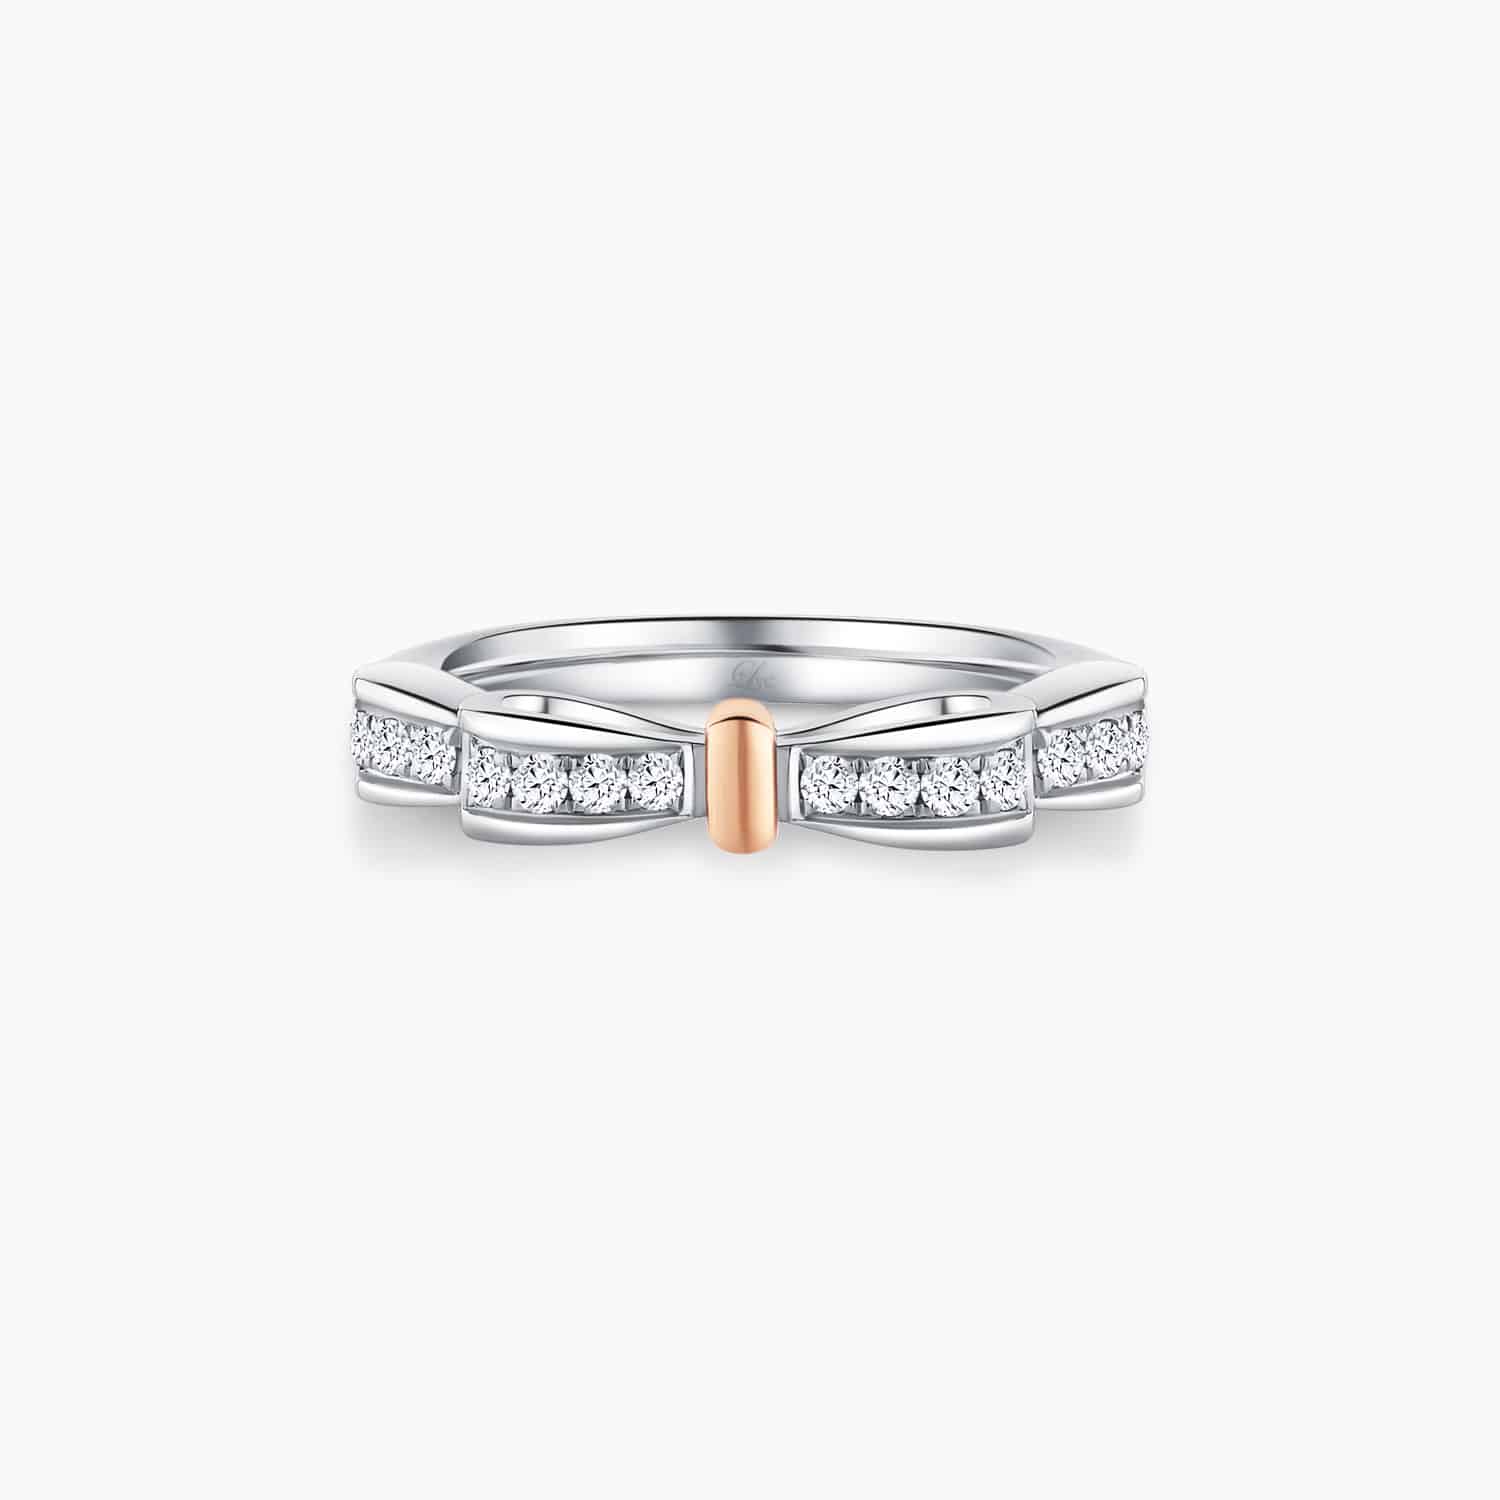 LVC NOEUD BOW WEDDING BAND WITH A ROSE GOLD KNOT AND DIAMONDS a white gold engagement wedding ring or wedding band for women in white and rose gold with 14 diamonds 钻石 戒指 cincin diamond